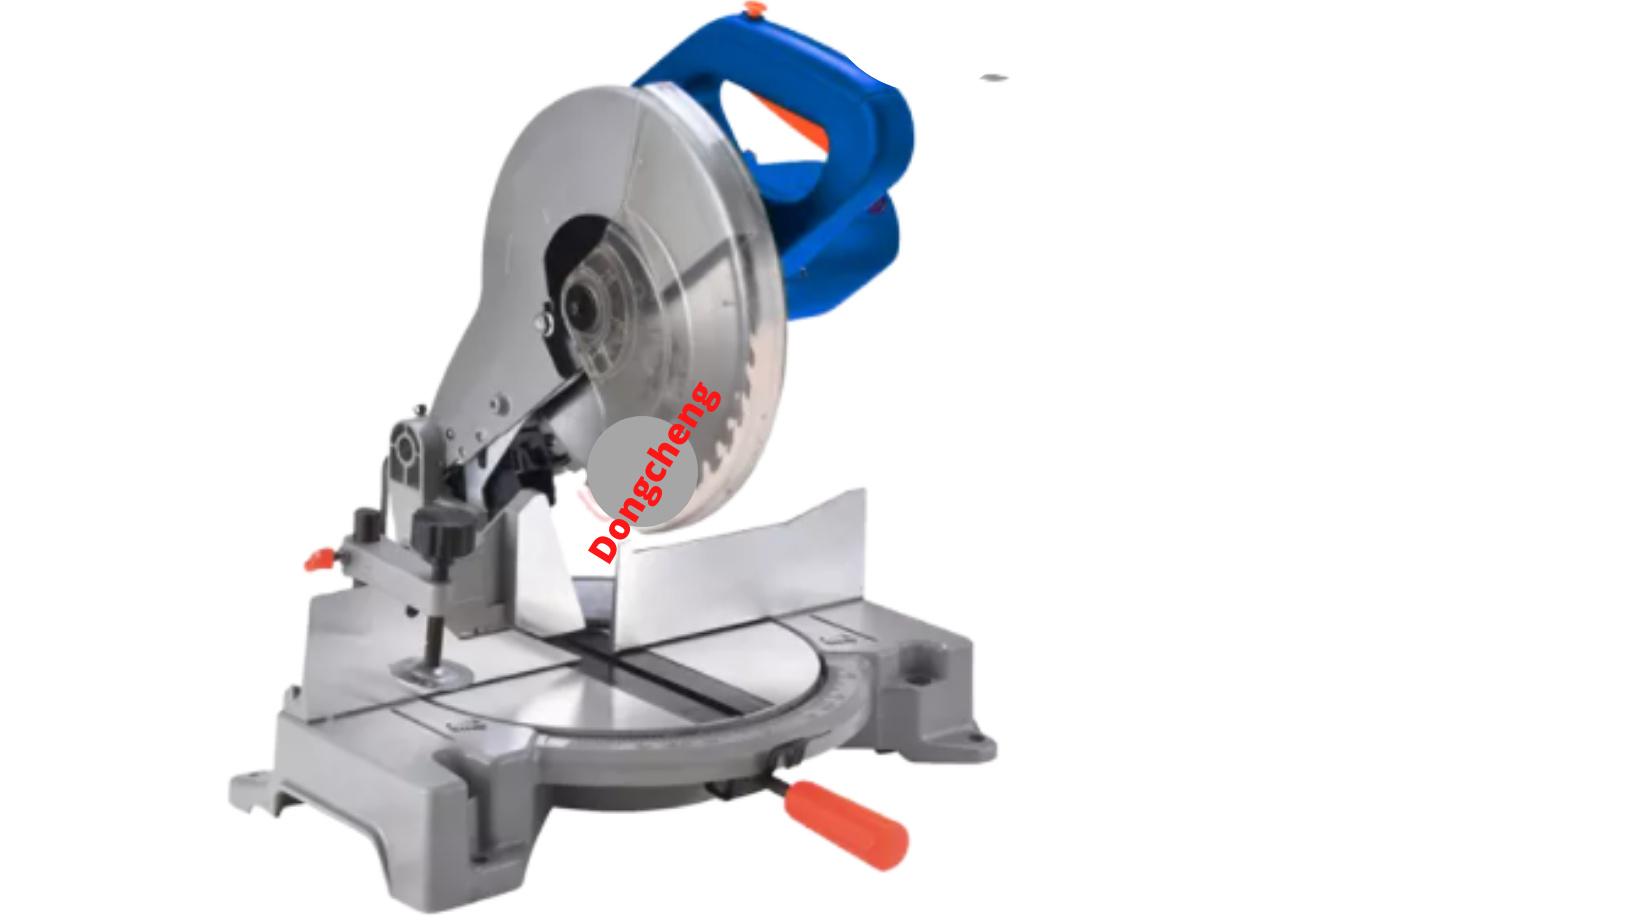 ELECTRIC MITRE SAW